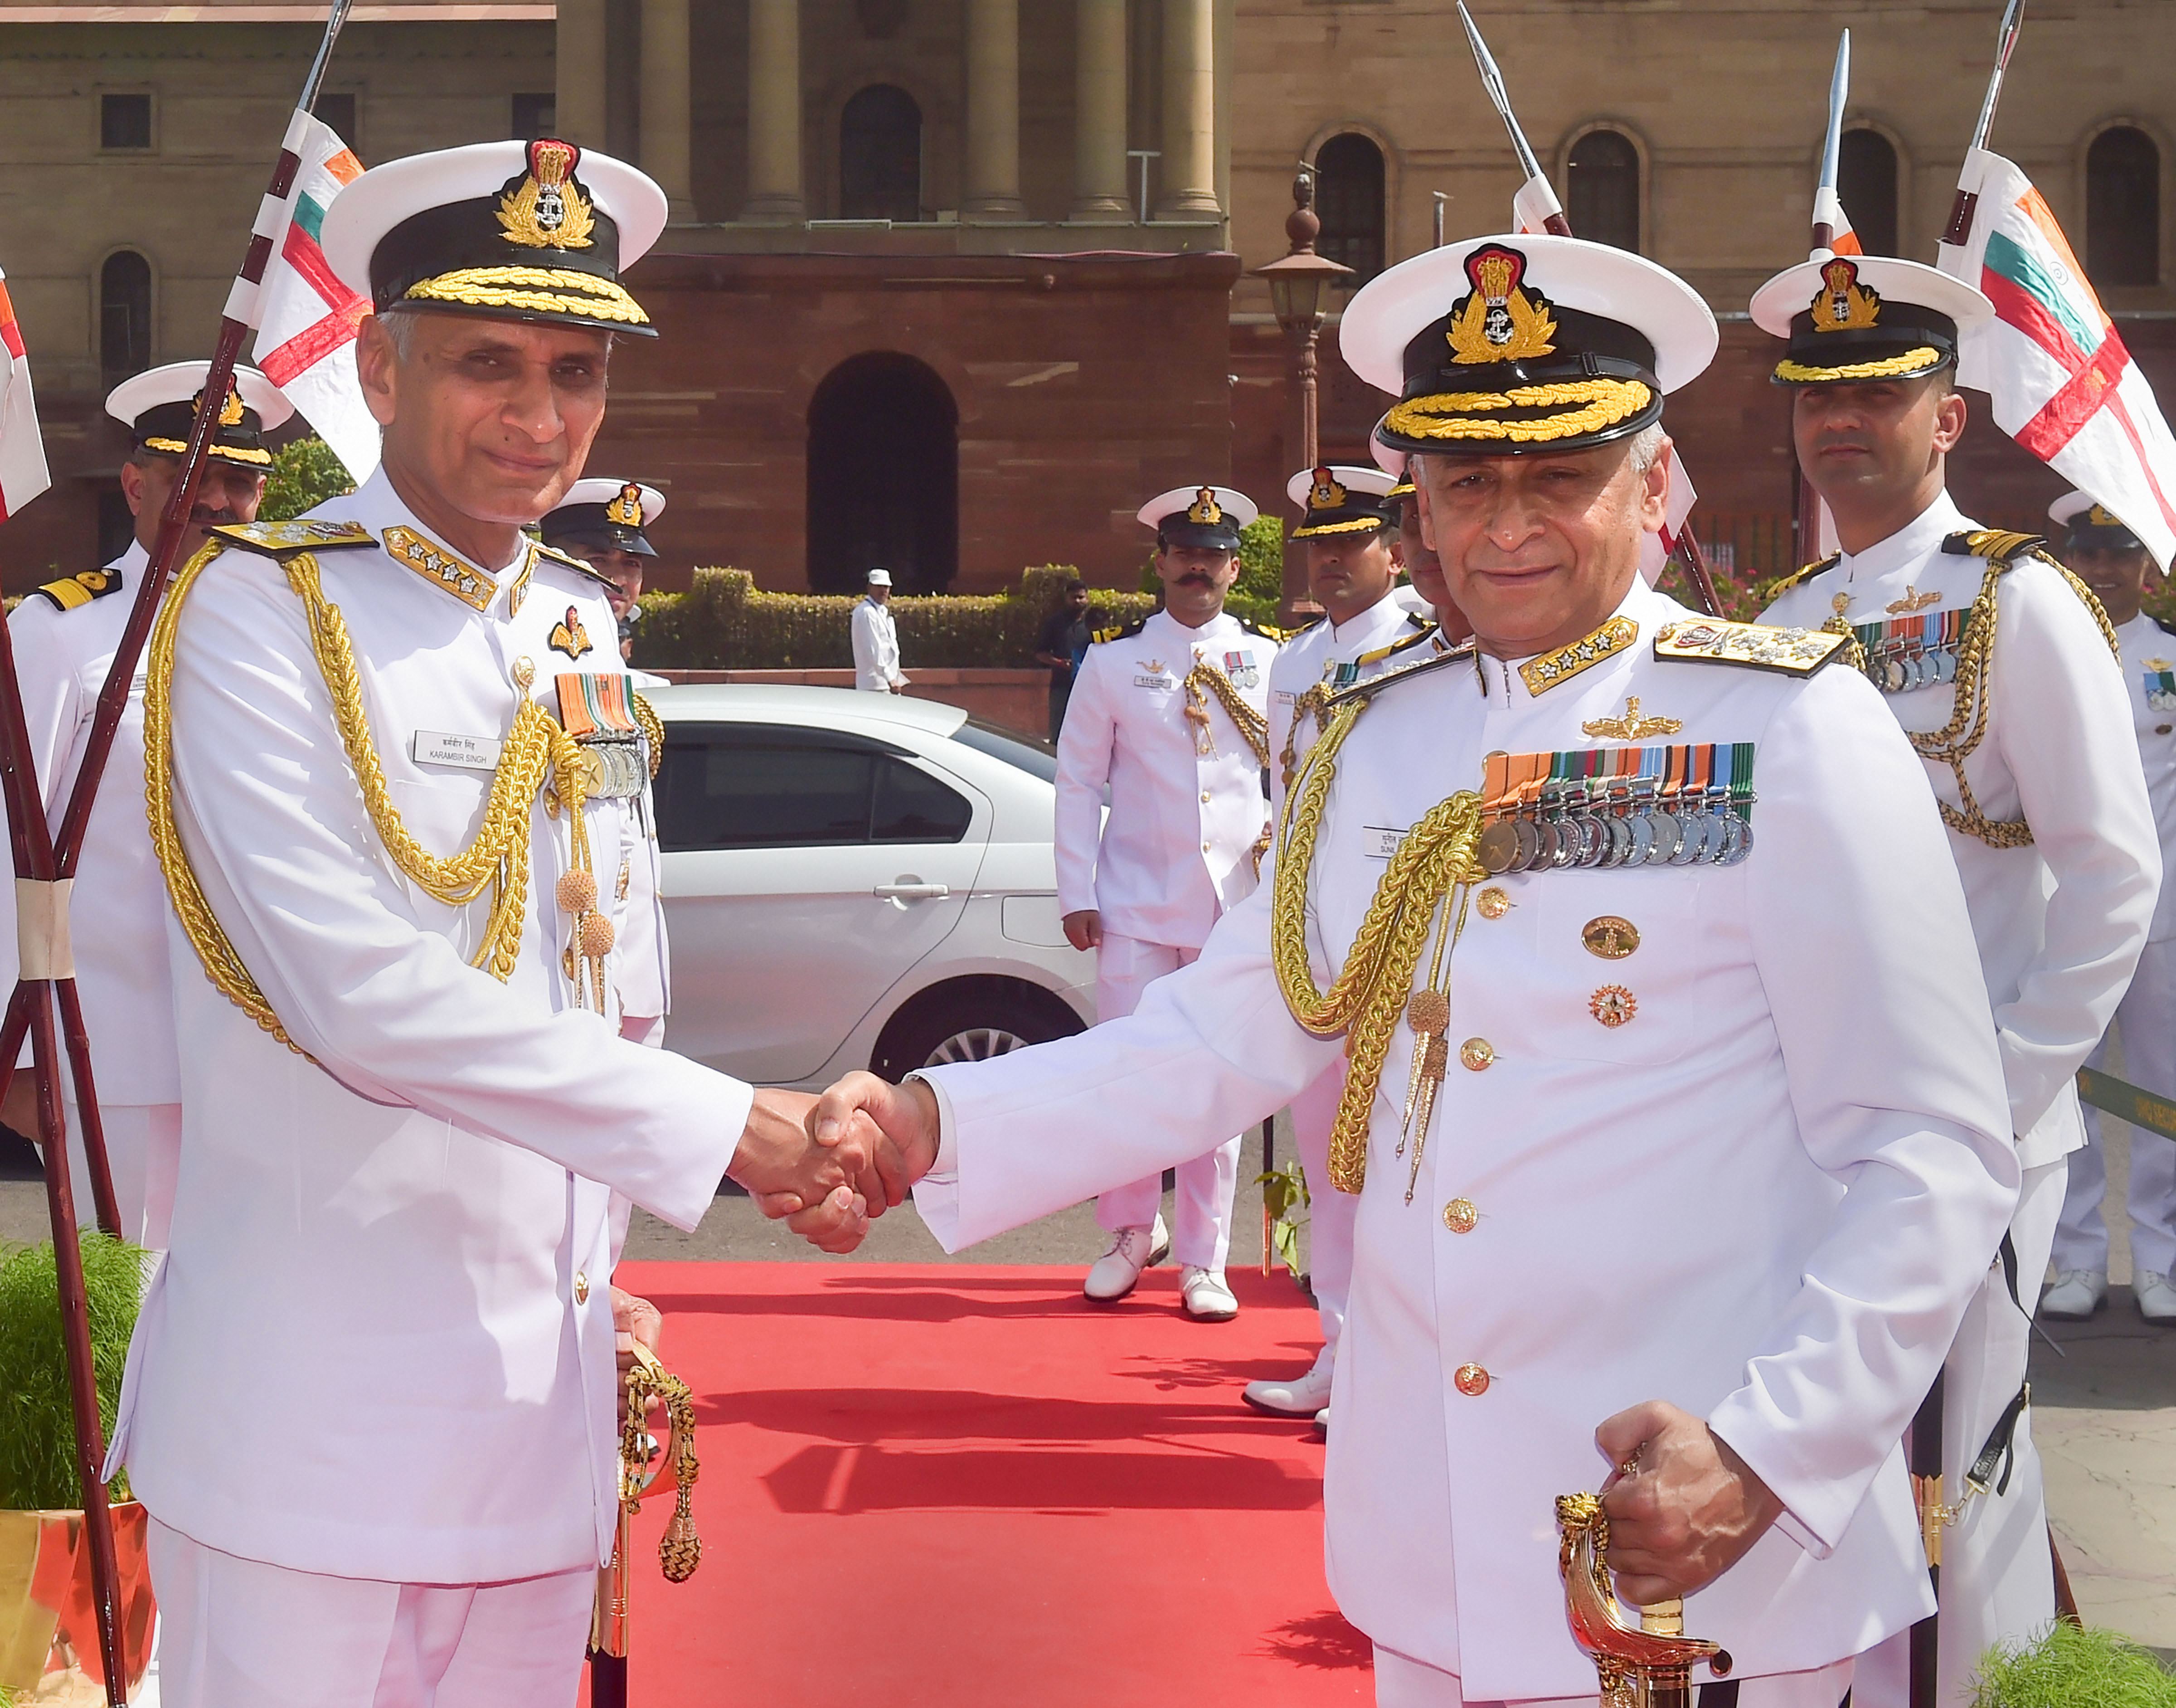 Admiral Karambir Singh shakes hands with outgoing Navy Chief Admiral Sunil Lanba during the Guard of Honour, before taking charge as the 24th Chief of the Naval Staff, at South Block in New Delhi - PTI